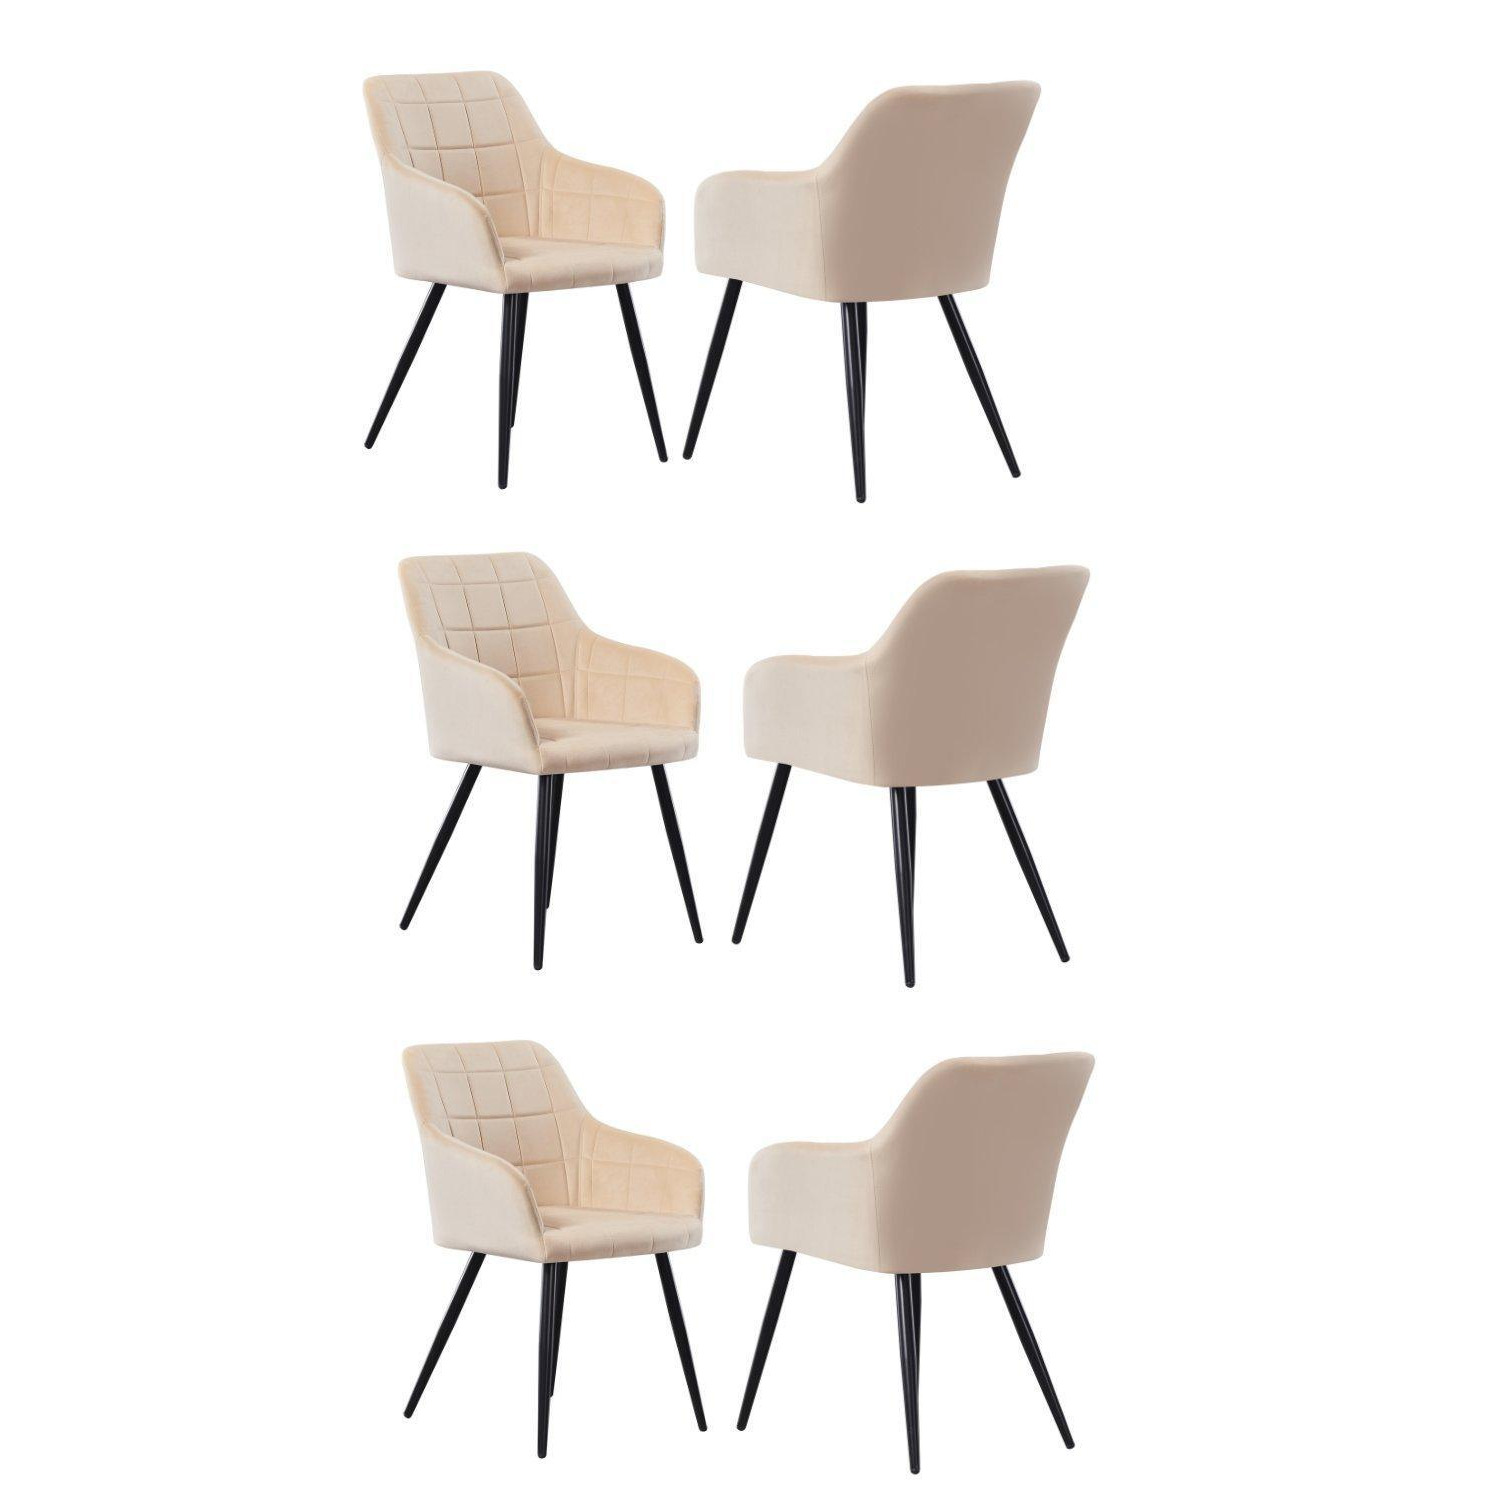 Set of 6 Camden Velvet Dining Chairs' Upholstered Dining Room Chairs - image 1